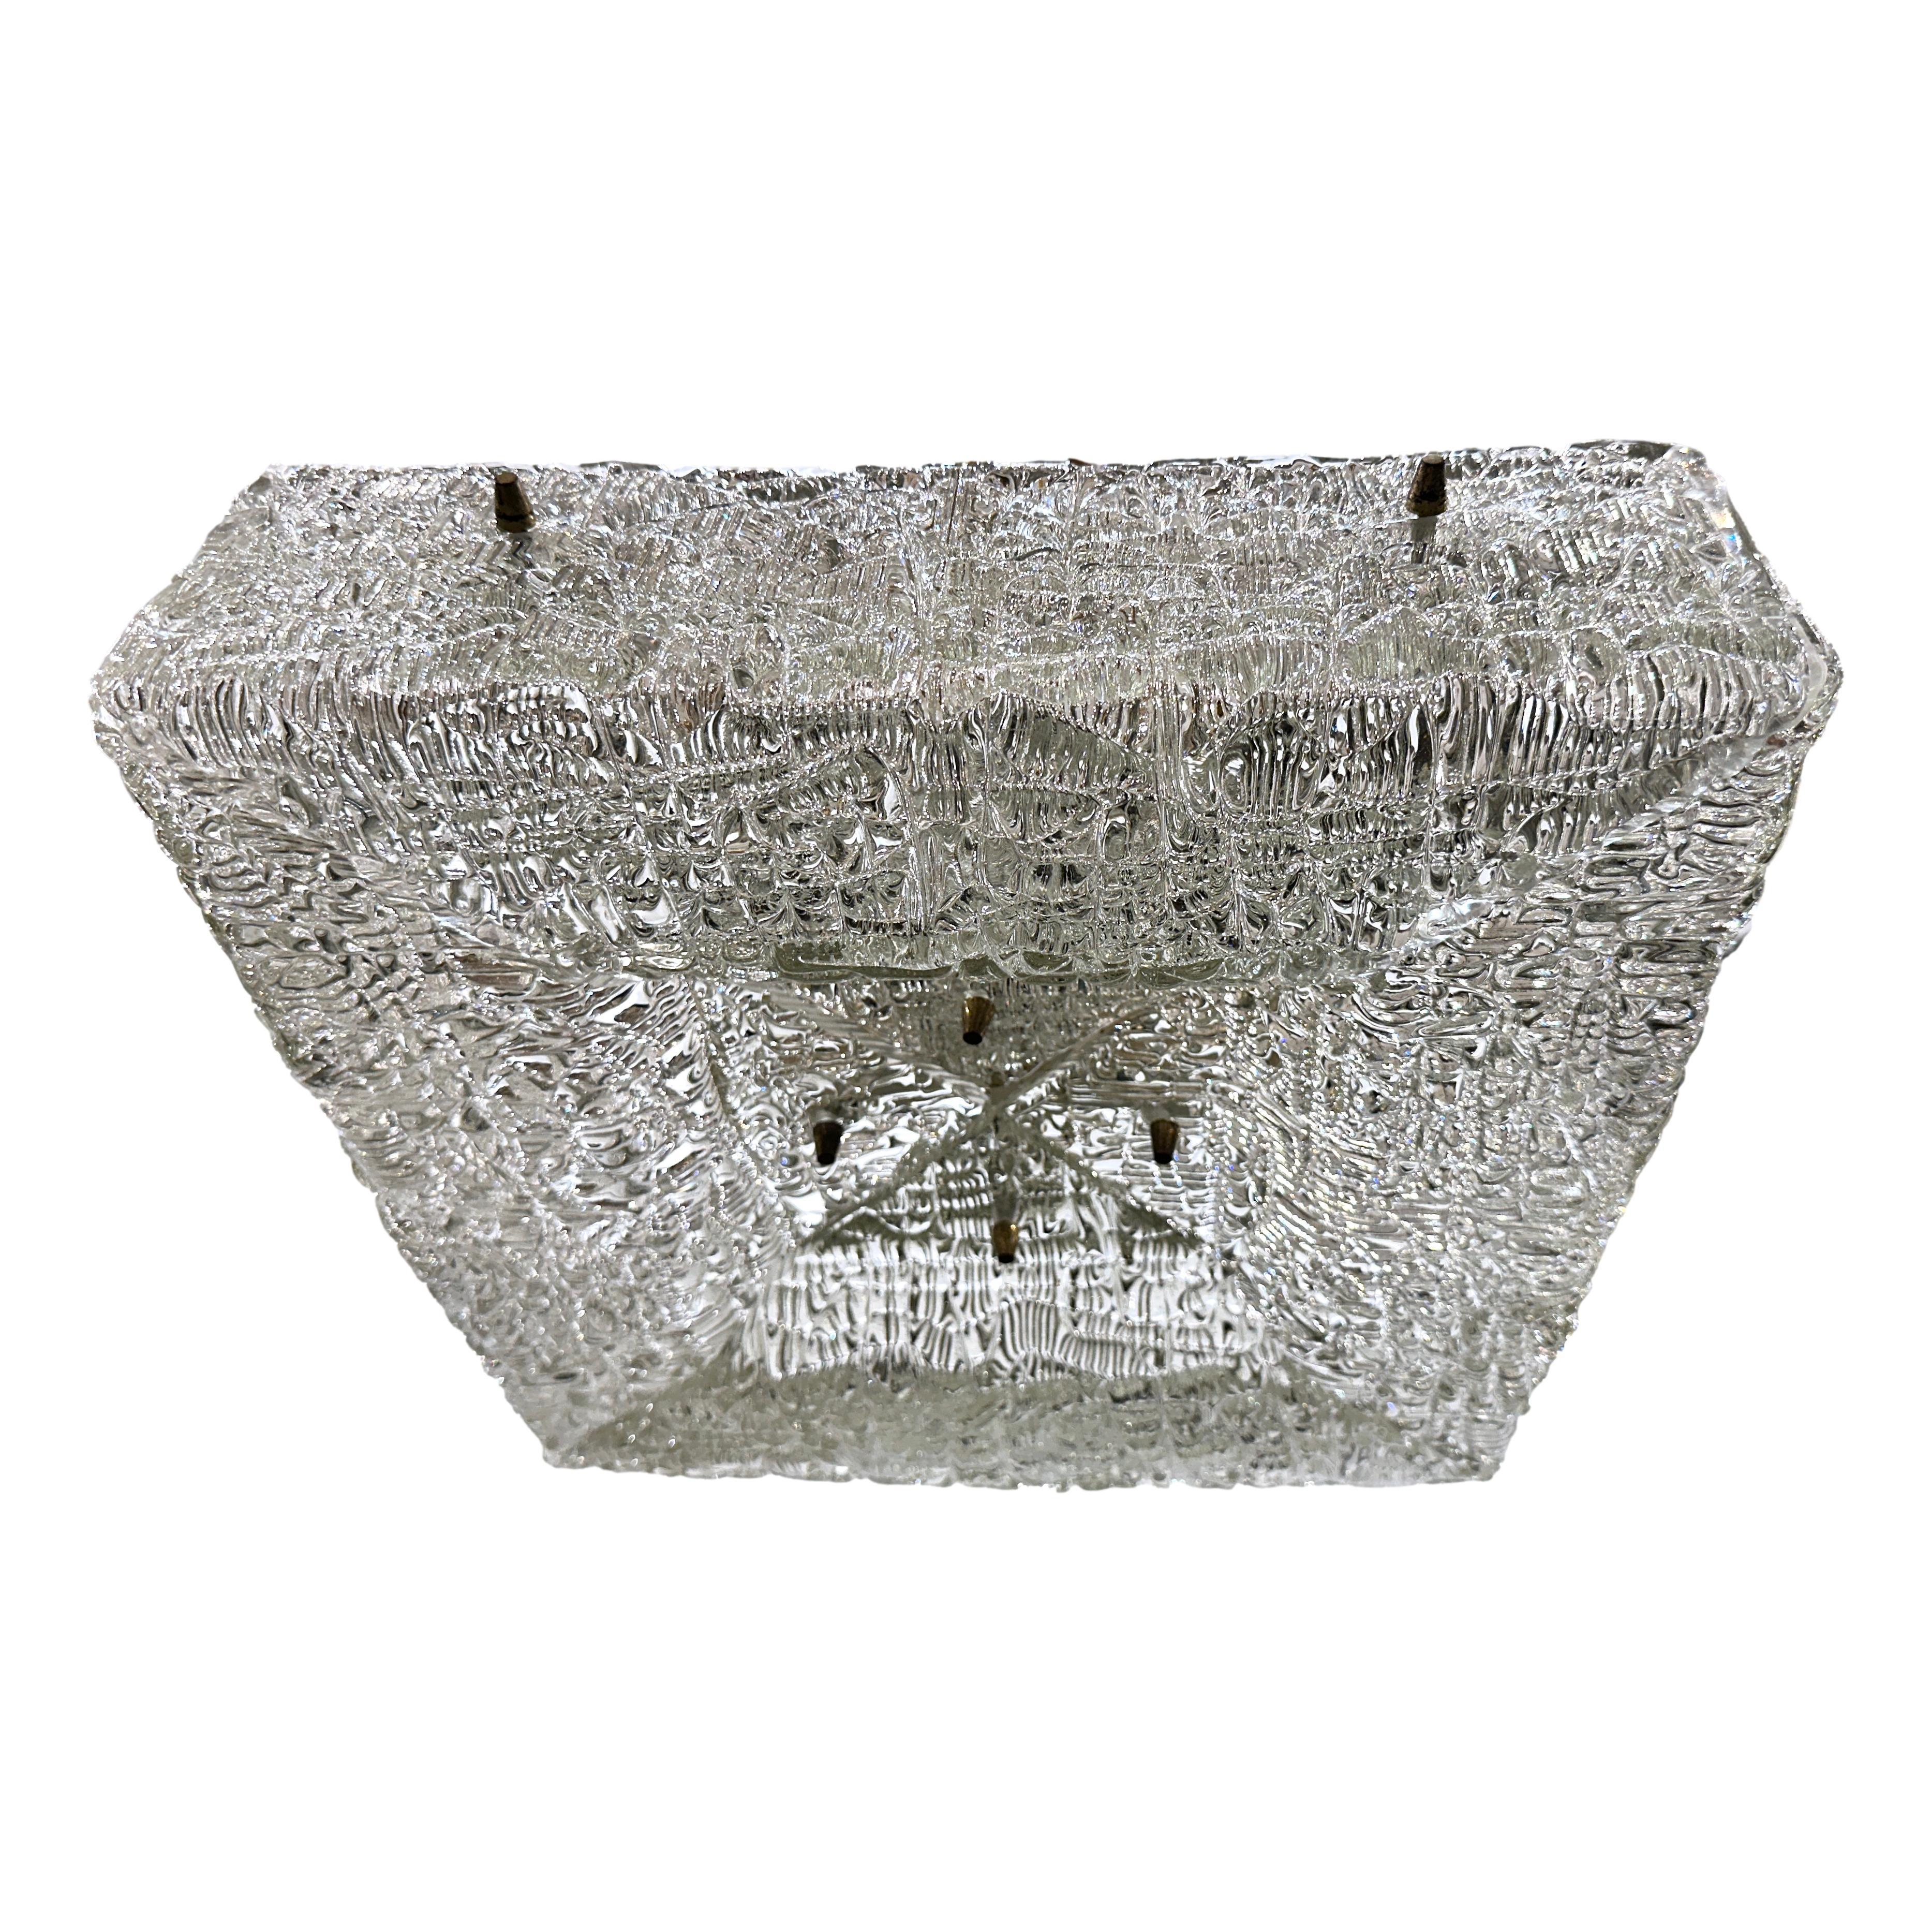 Molded Midcentury Swedish Glass Square Light Fixture For Sale